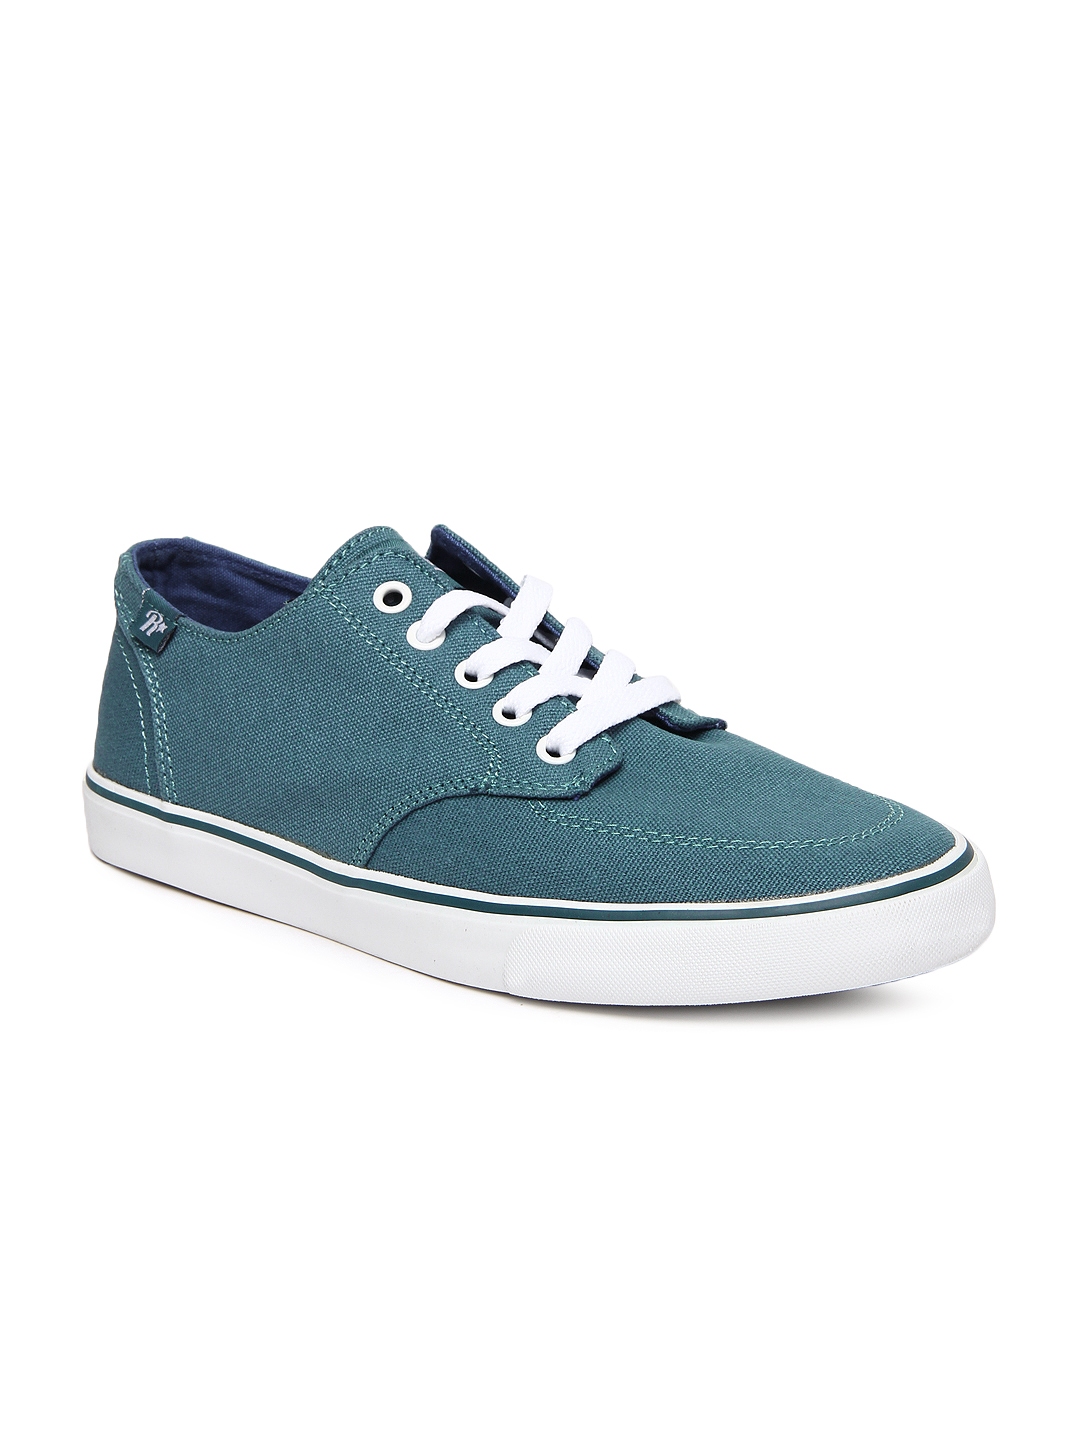 Buy Roadster Men Blue Casual Shoes - Casual Shoes for Men 388618 | Myntra